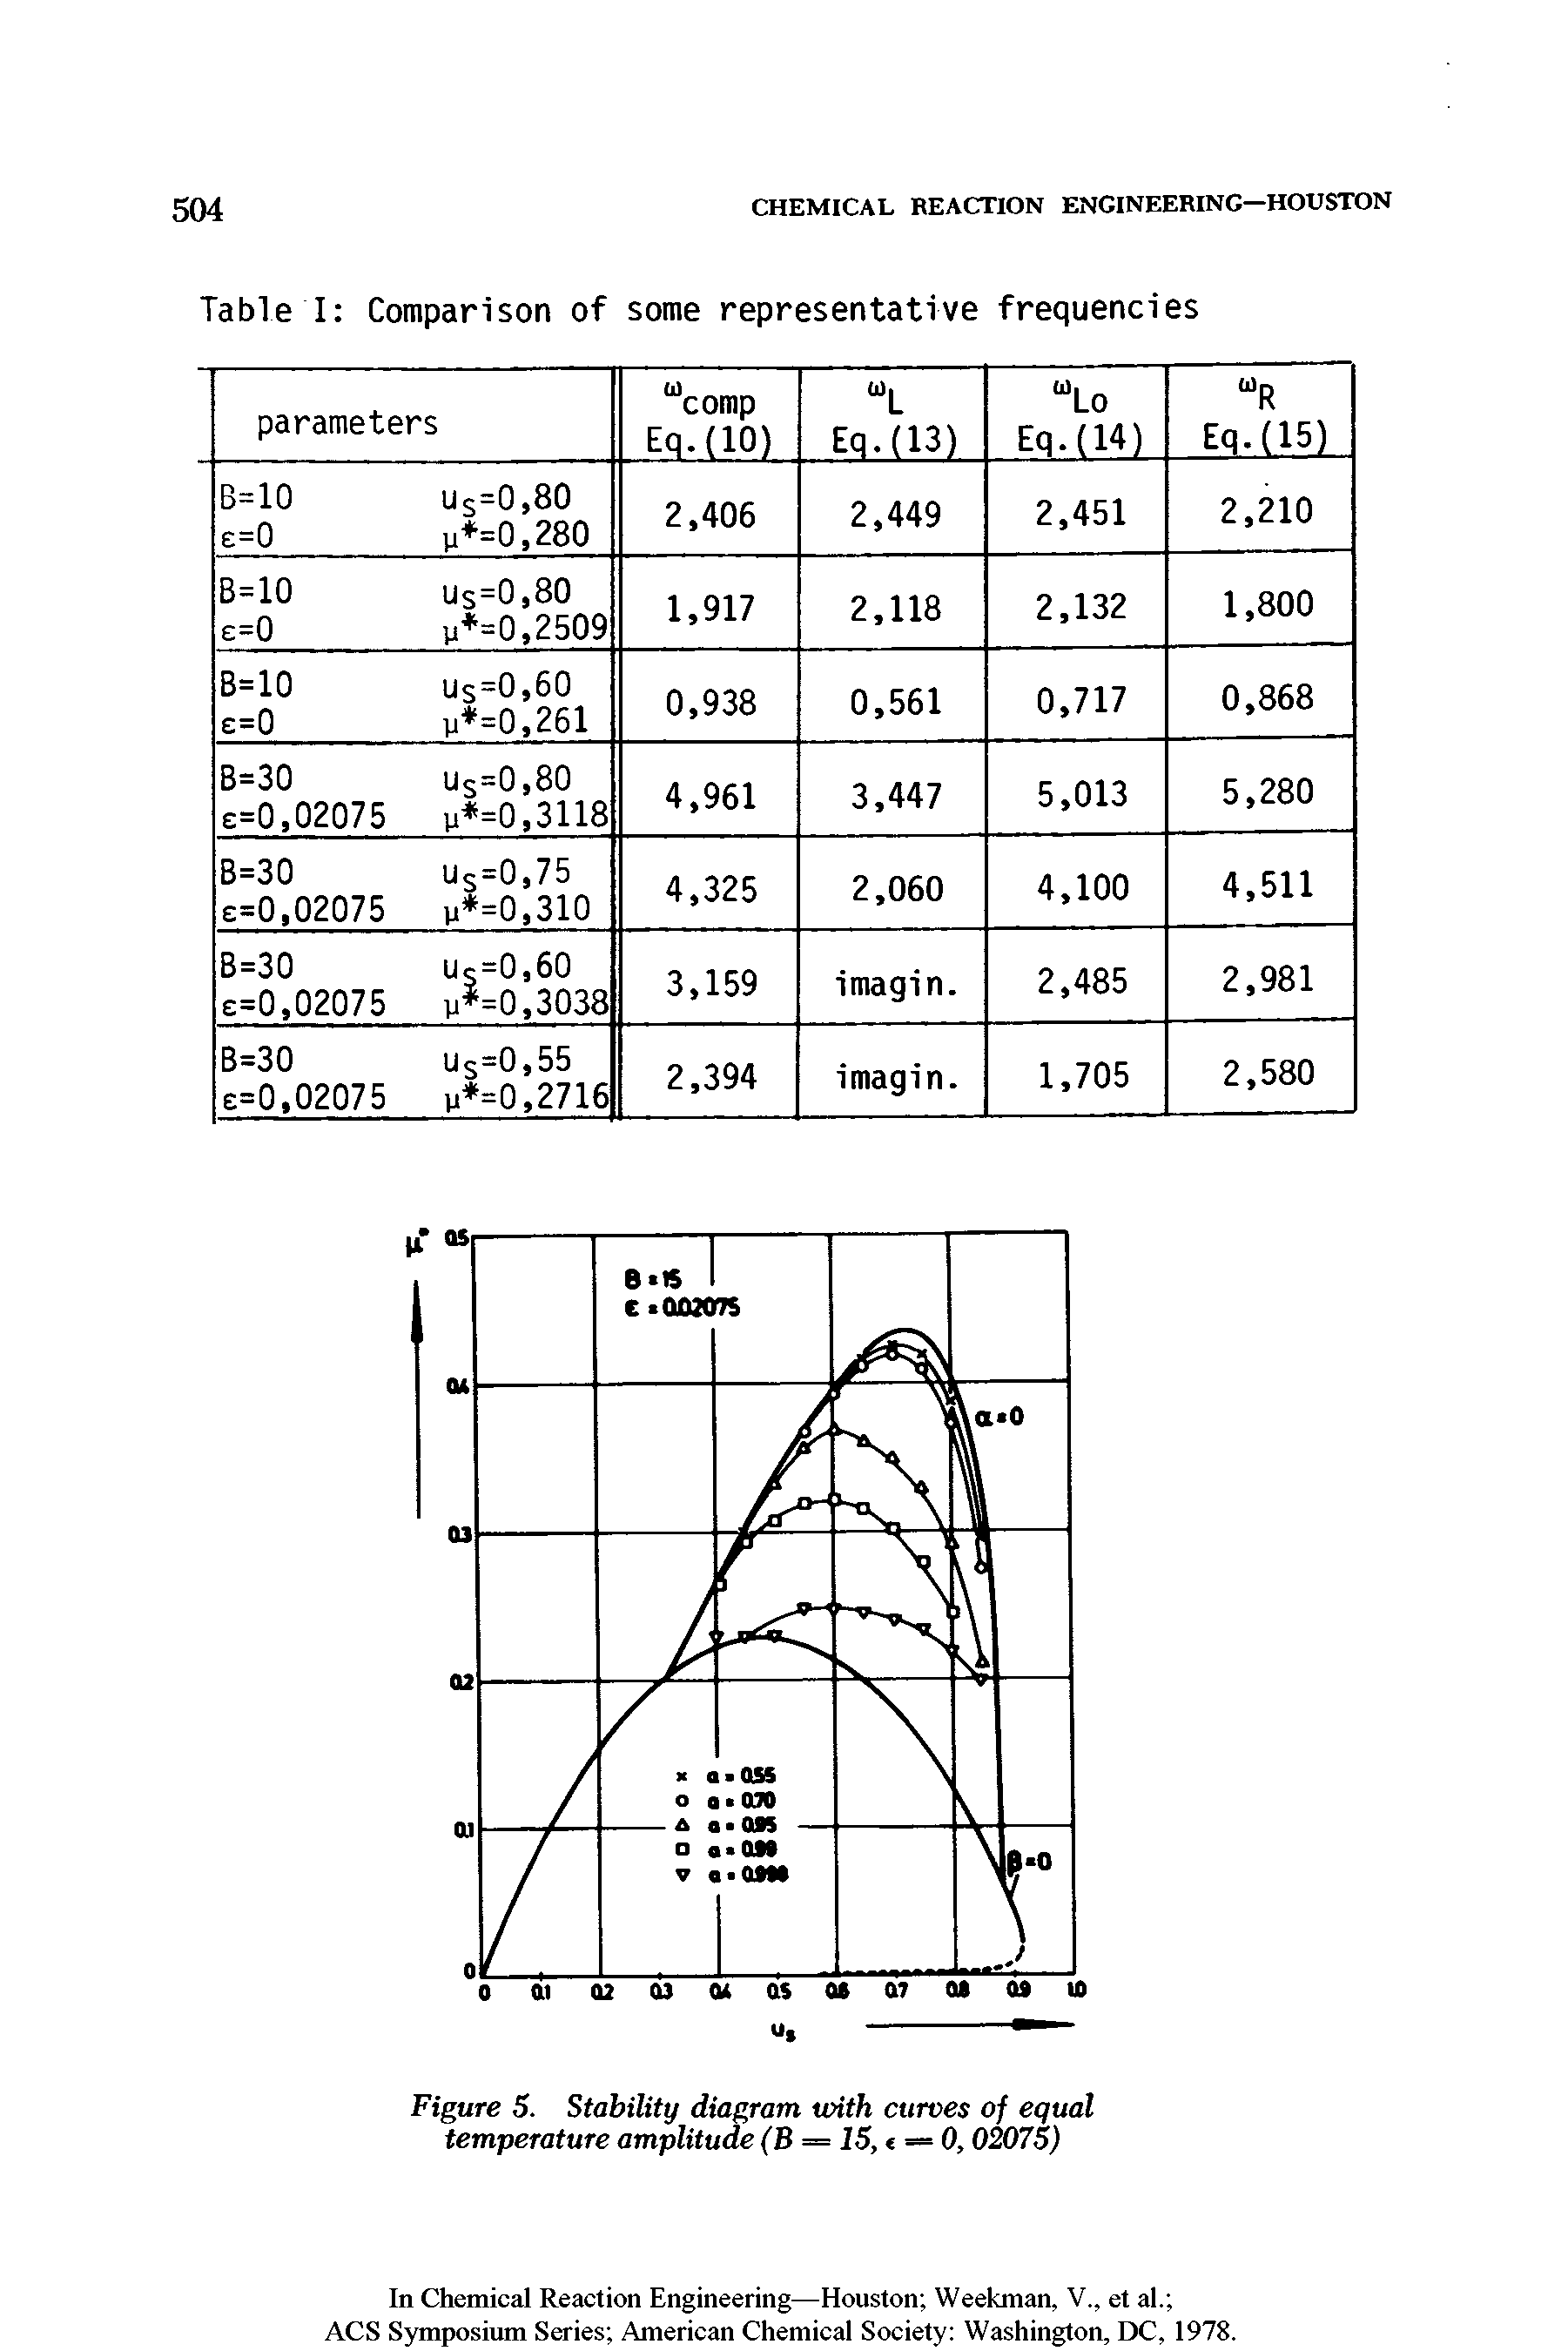 Figure 5. Stability diagram with curves of equal temperature amplitude (B = 15,( = 0,02075)...